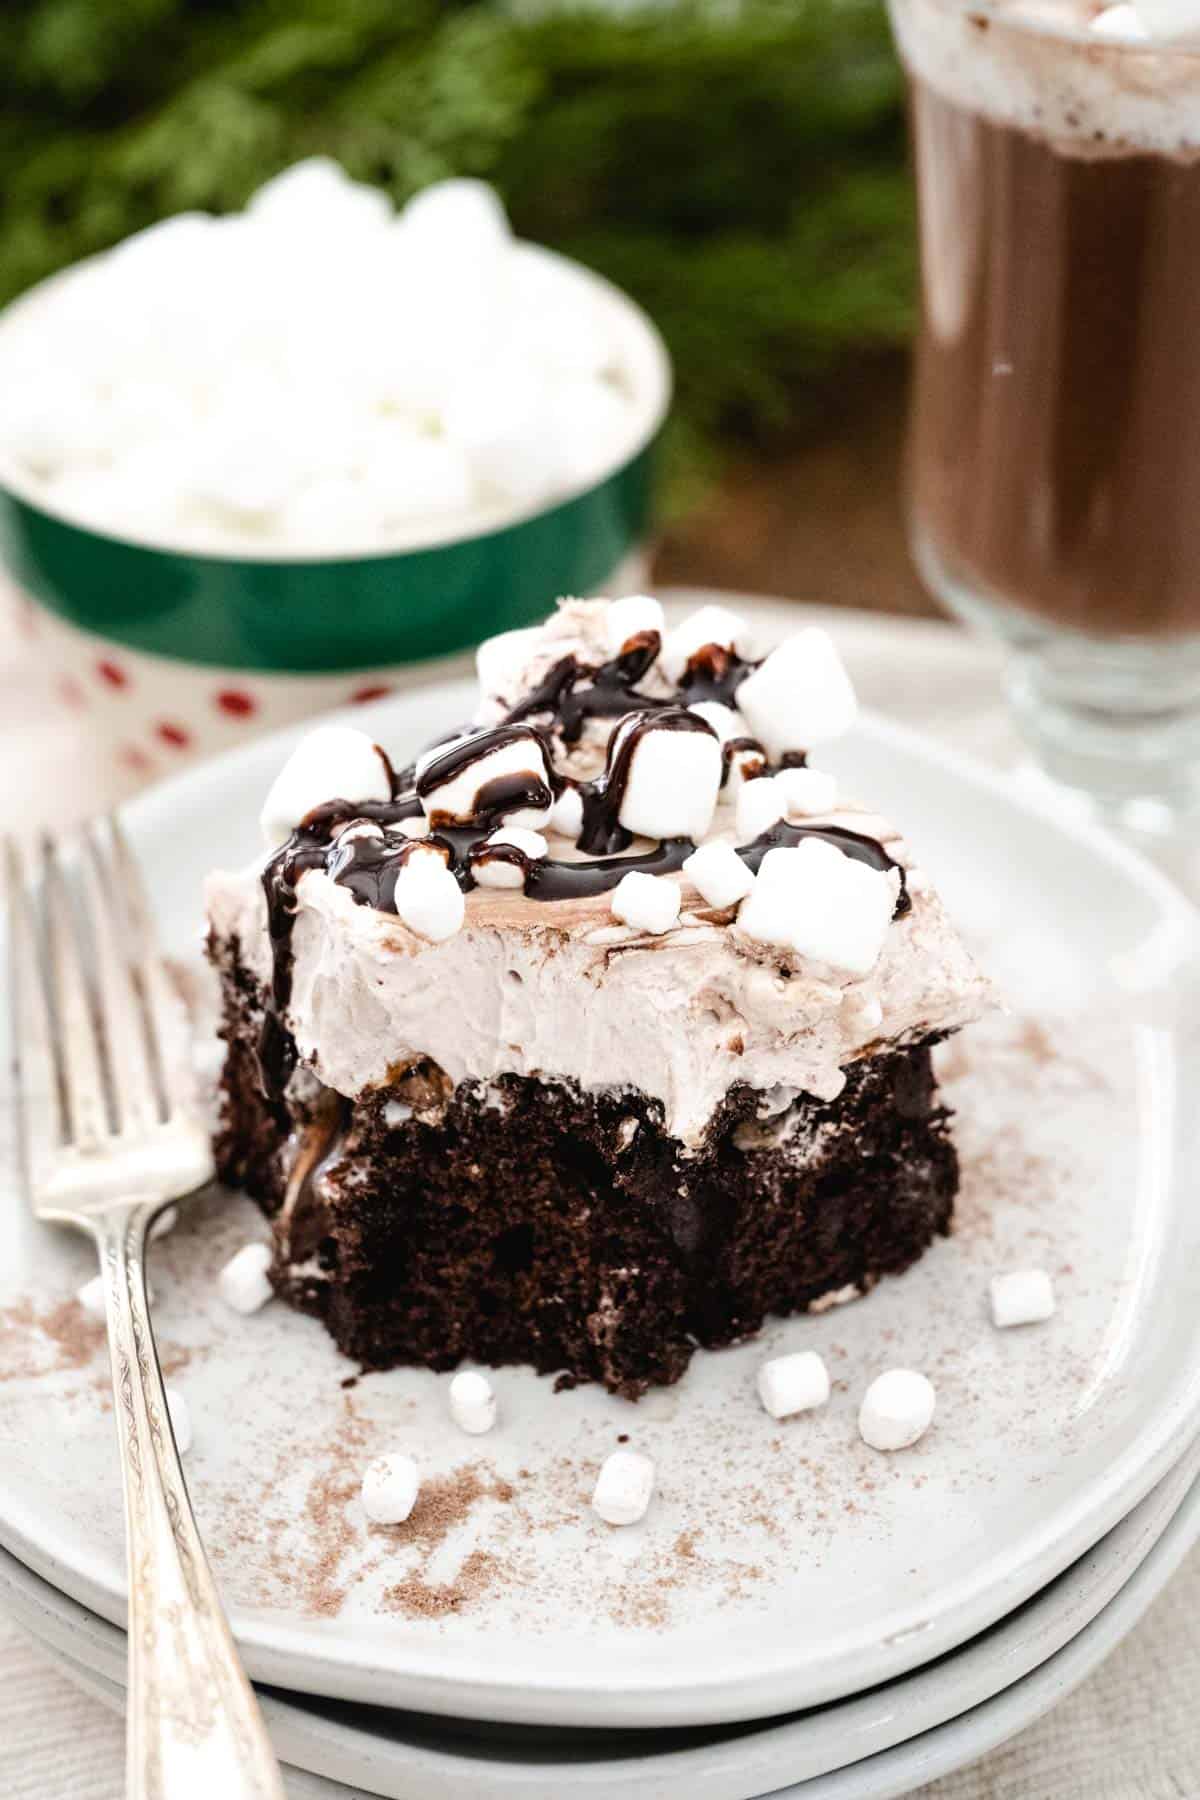 Hot chocolate cake on a plate with a bite taken from the cake.